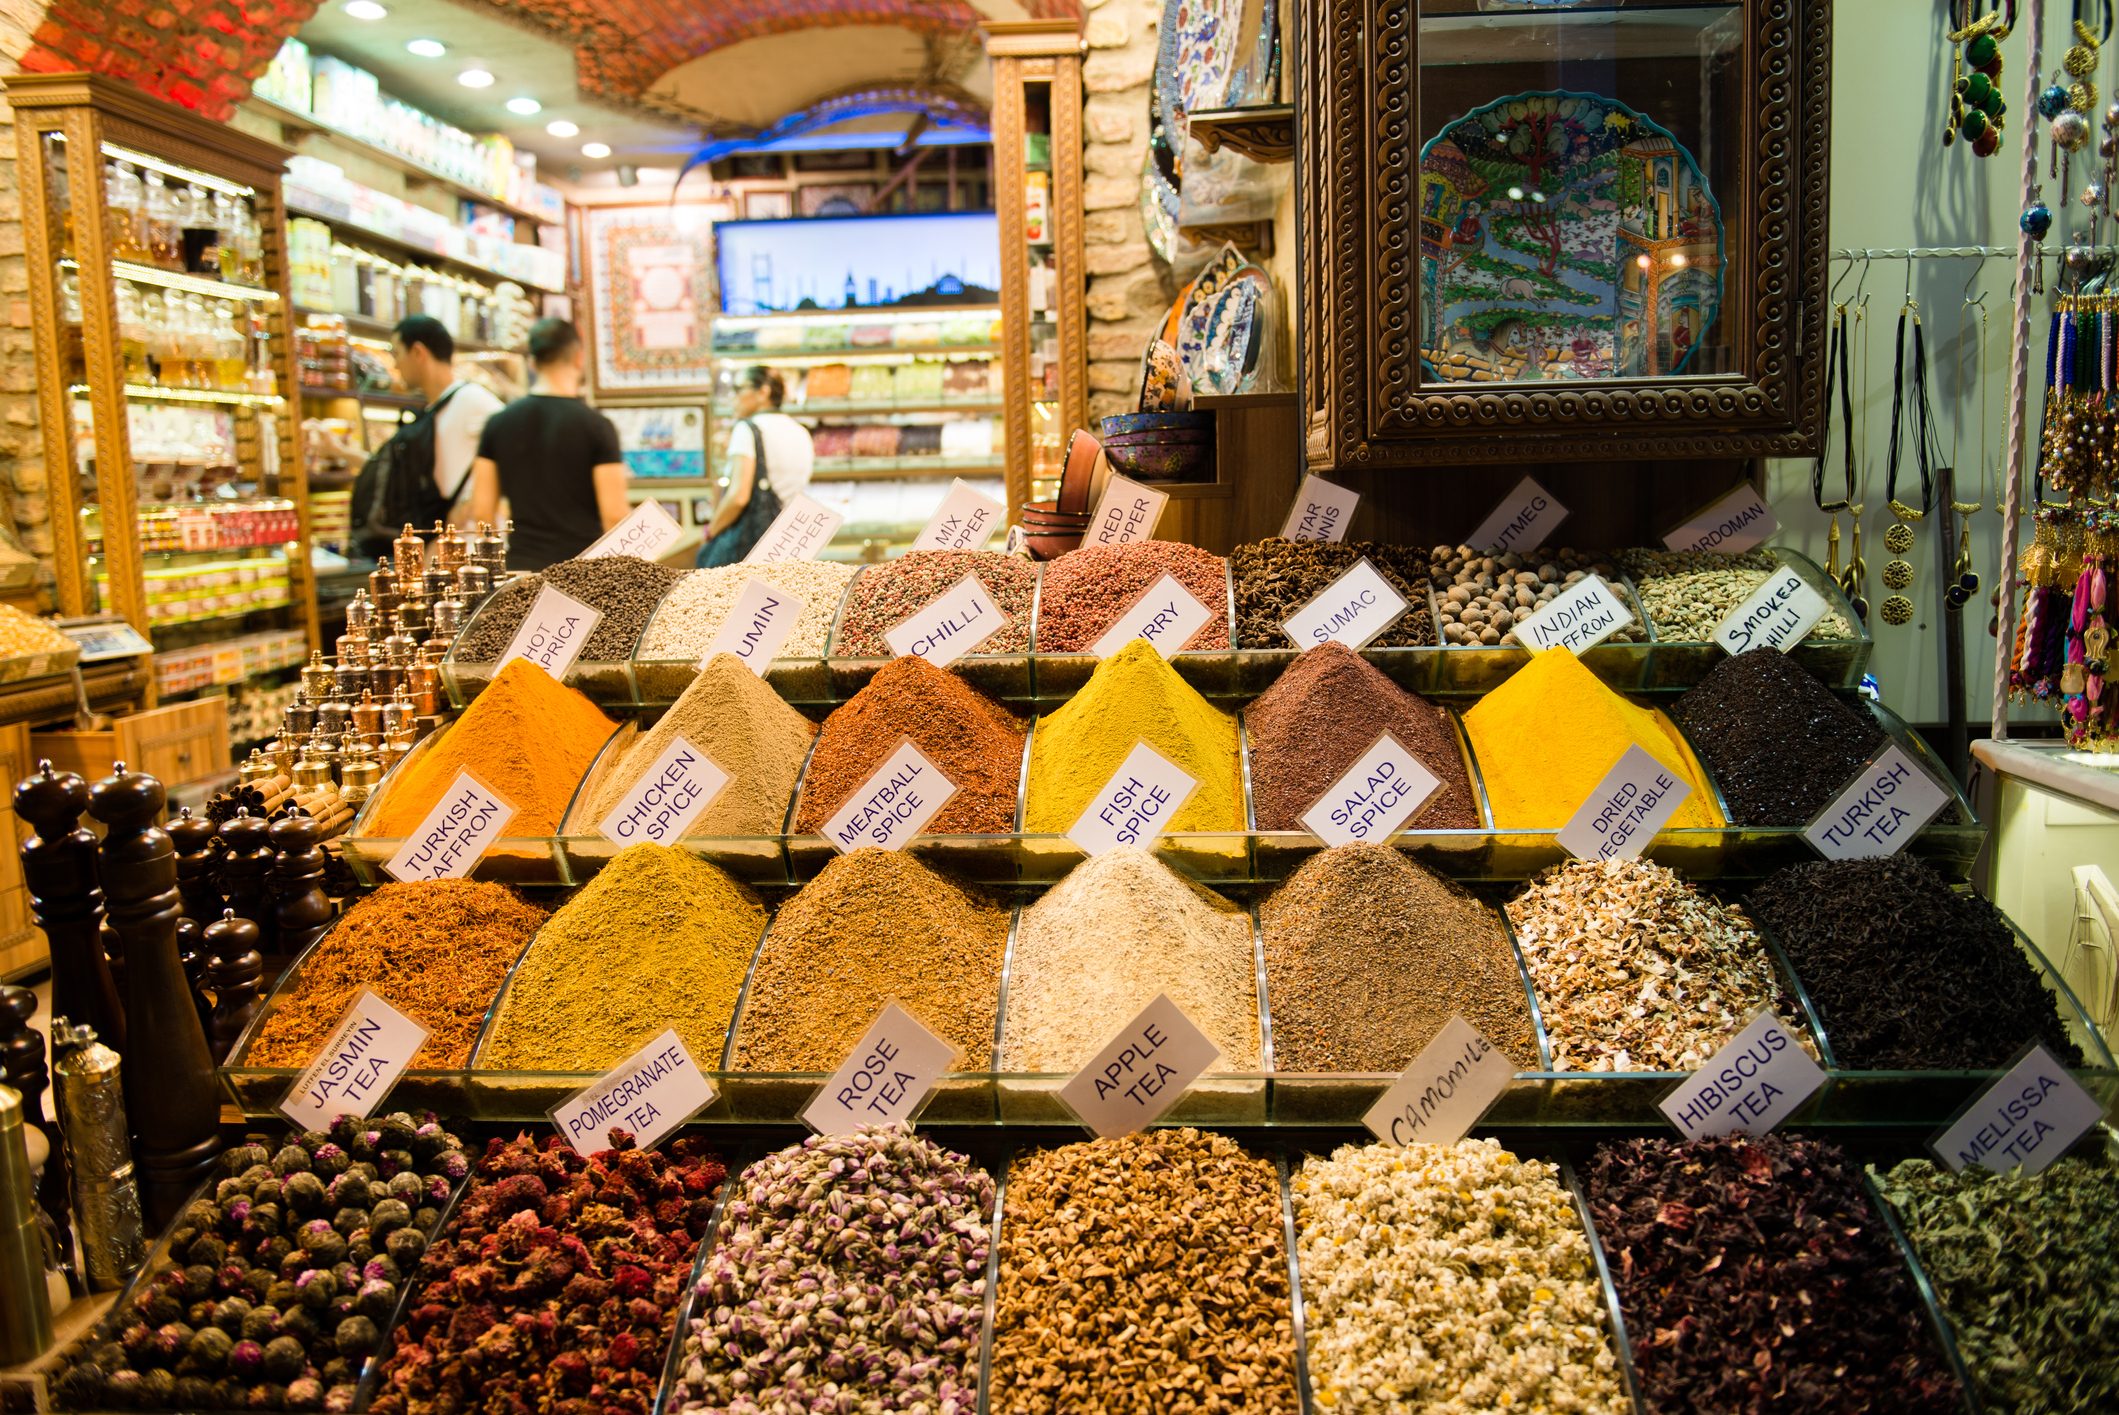 Rows of spices in a food stand